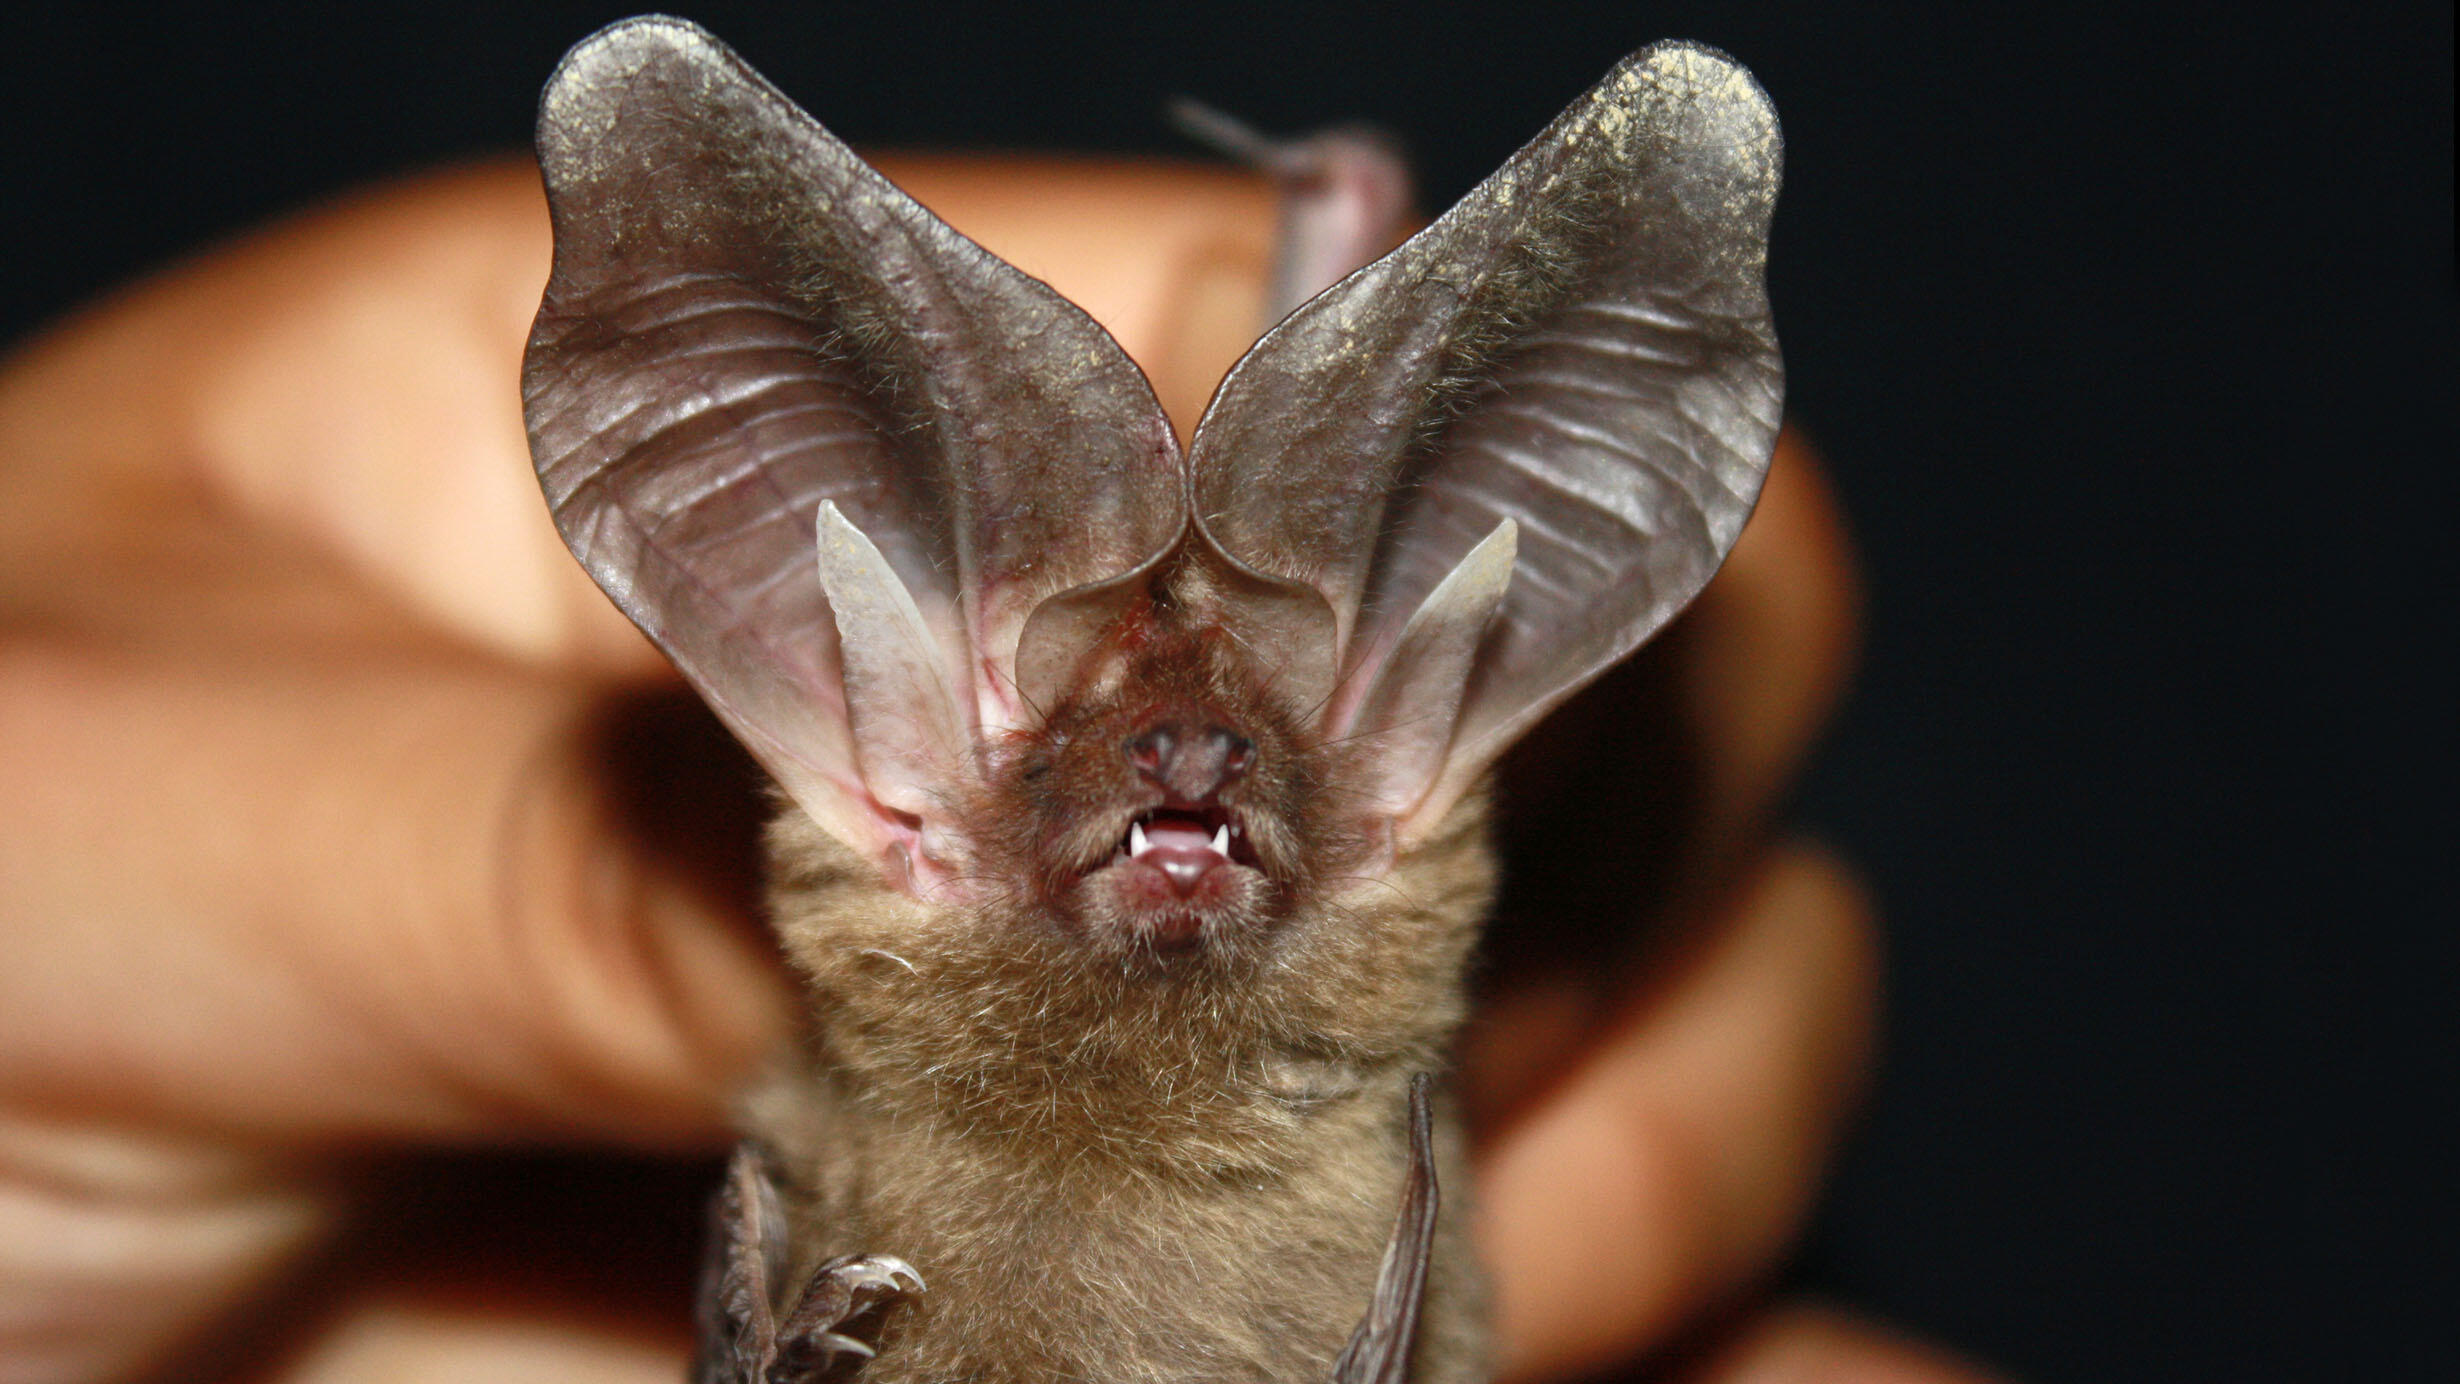 Closeup of human fingers holding a live bat with large ears and tiny fangs.